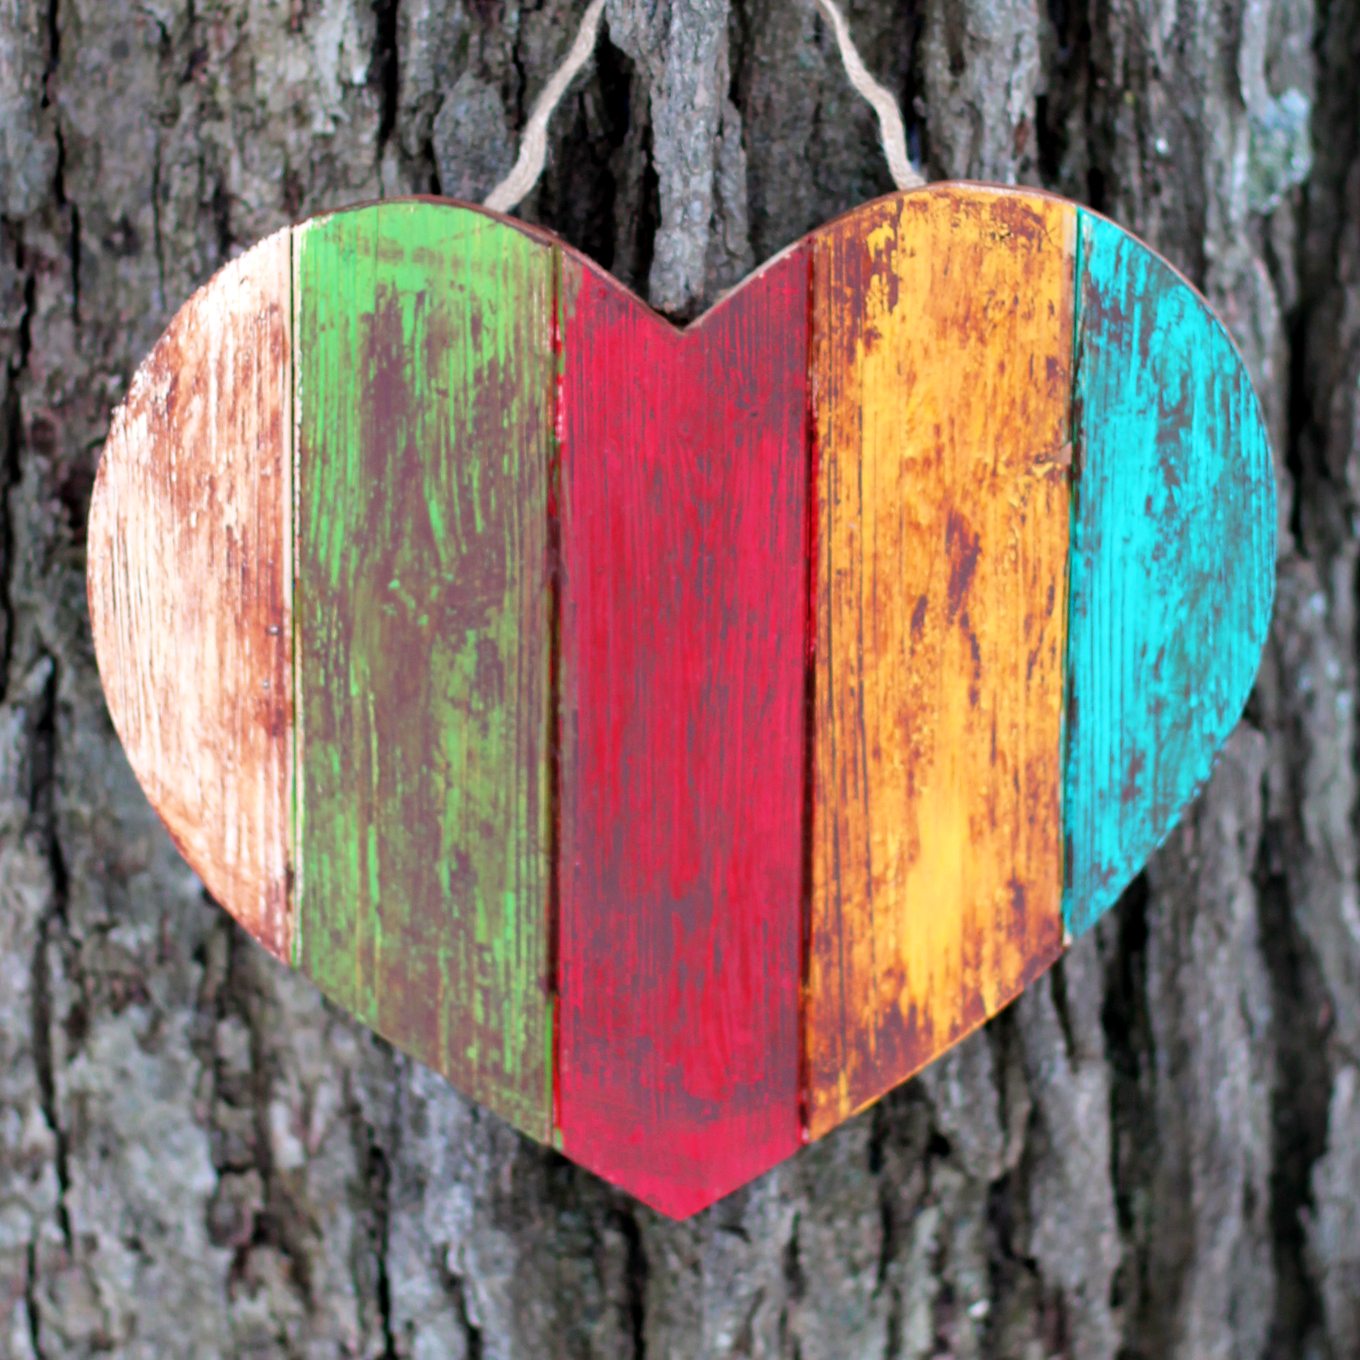 Antiqued Wooden Hearts